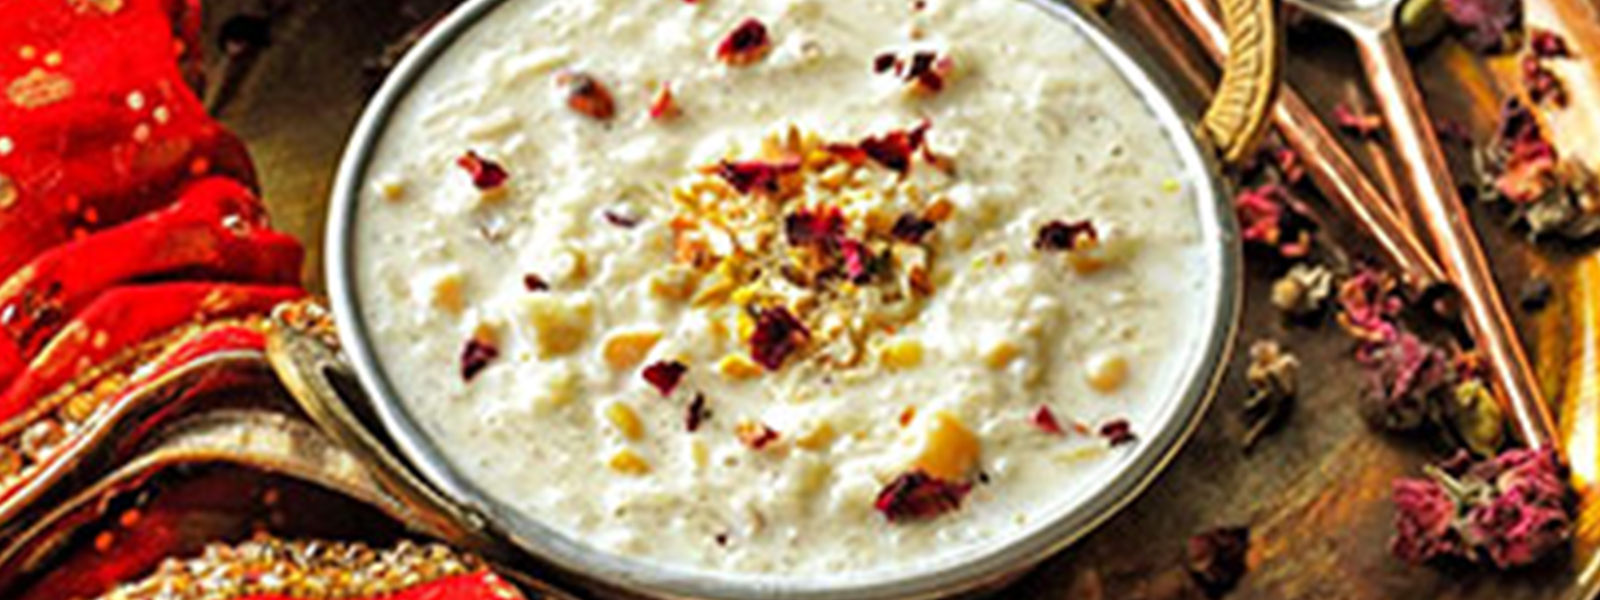 Indulge your sweet tooth with this creamy kheer recipe